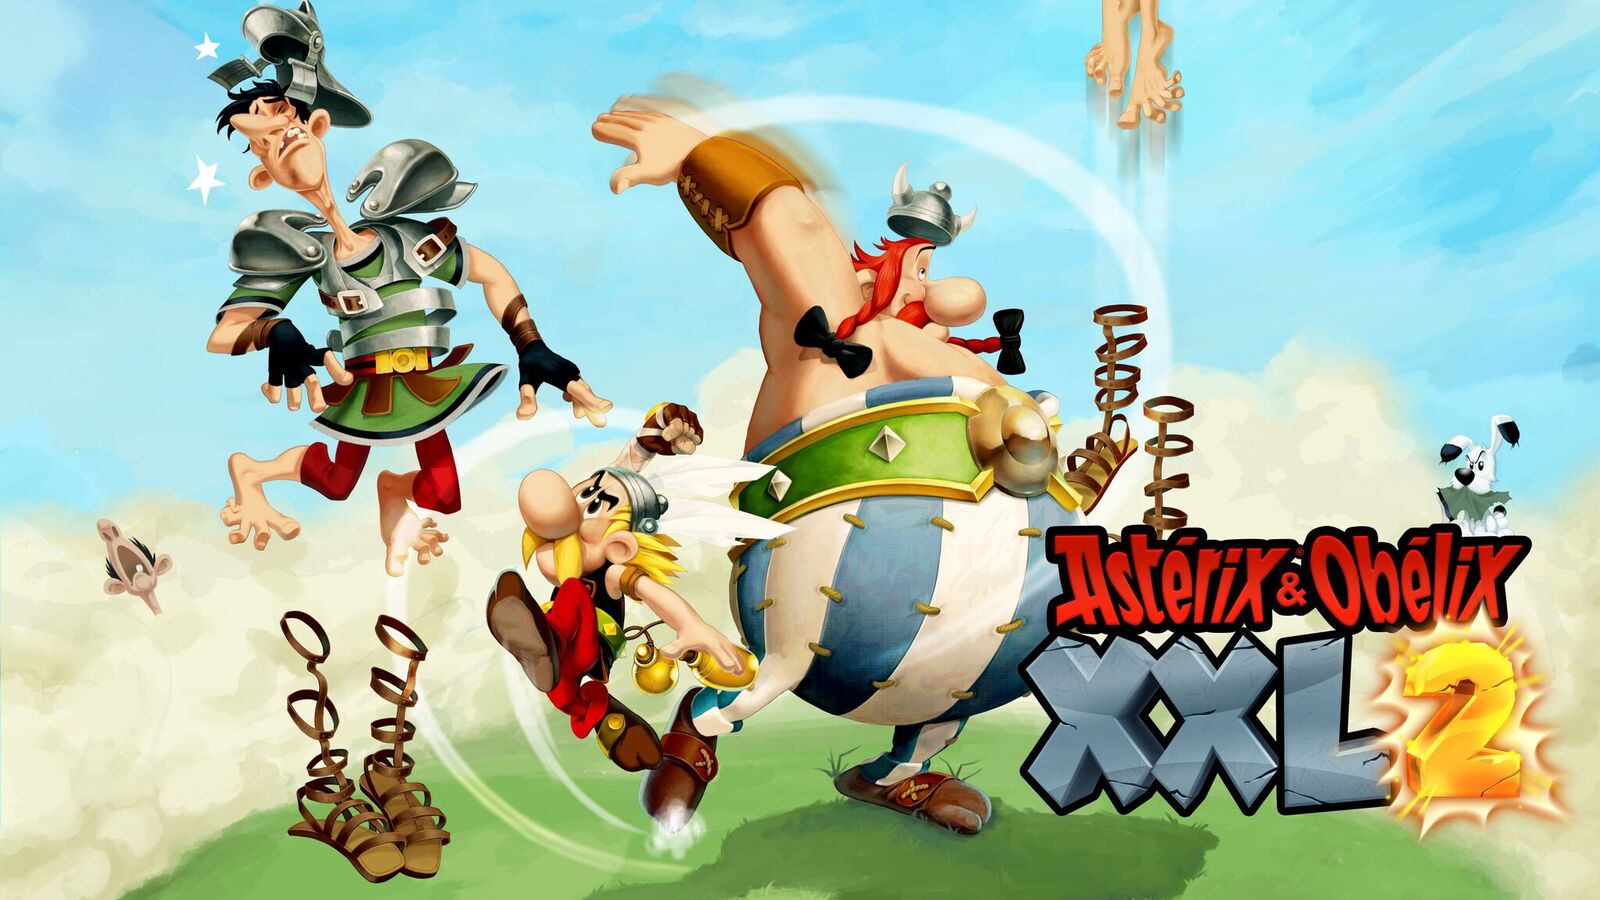 Asterix & Obelix XXL 2 review: the most icon duo you’ve never heard of